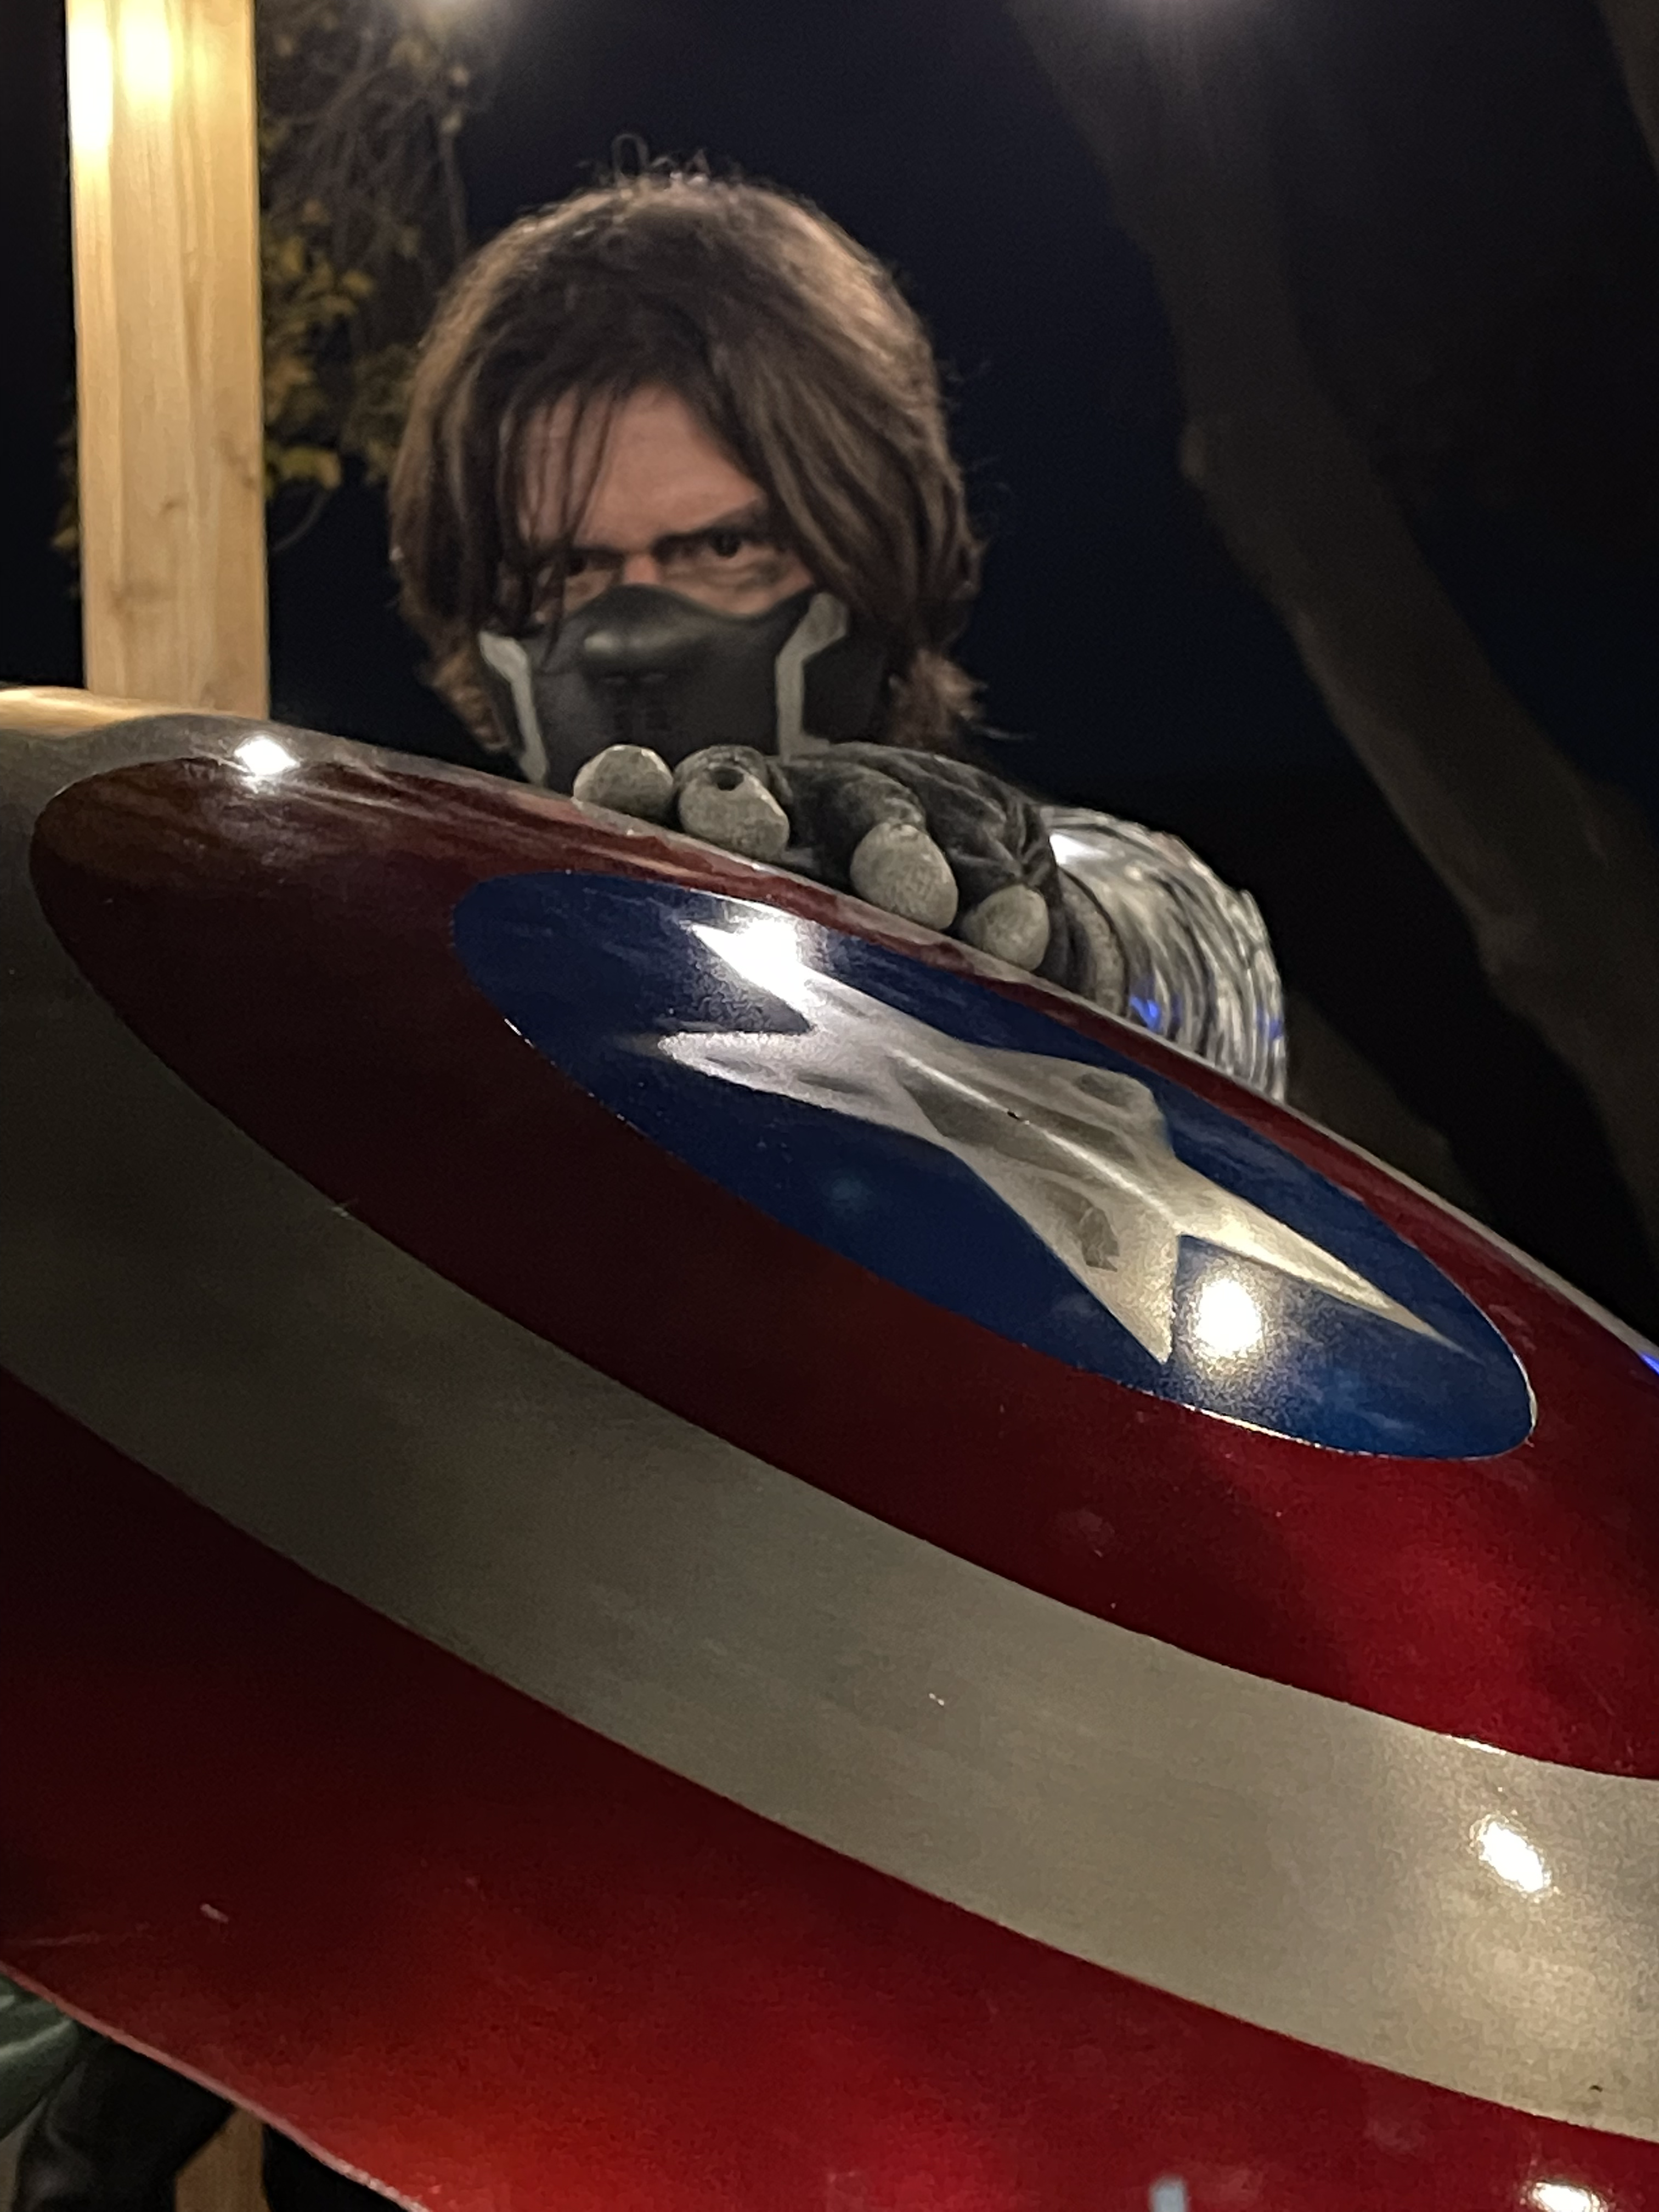 Stephen Dressed up as the Winter Soldier Holding Captain America's Shield